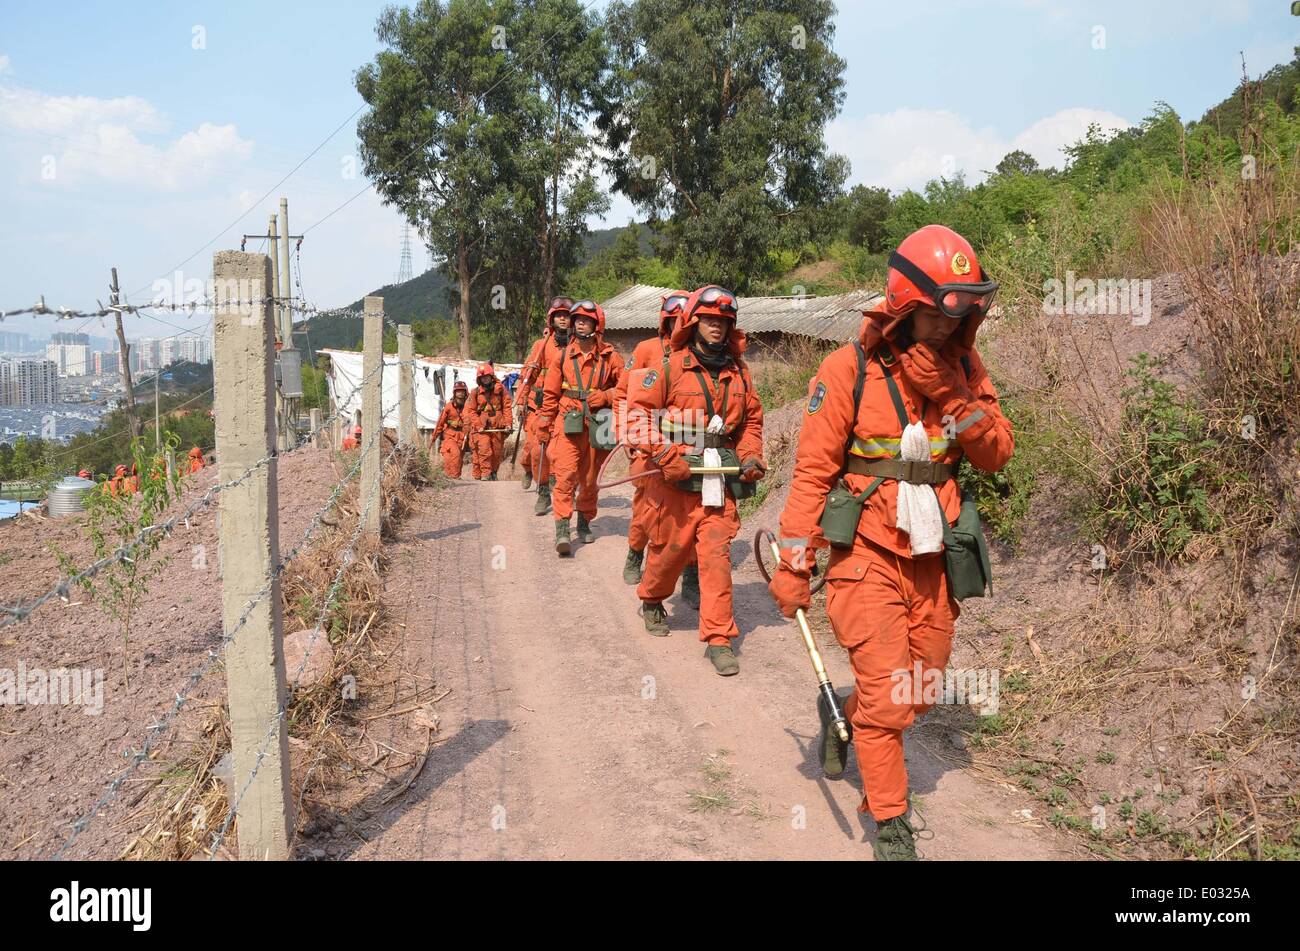 Dali, China. 30th Apr, 2014. Firefighters move towards a site where a forest fire reburned in Xiaguan Town in the city of Dali in southwest China's Yunnan Province, April 30, 2014. A forest fire here was extinguished by 8:10 a.m. yet reburned at 2:20 p.m.Wednesday. A total of 1,120 firefighters tackled the blaze, which burned an area of more than 200 mu (about 13.3 hectares). Credit:  Hu Shuli/Xinhua/Alamy Live News Stock Photo